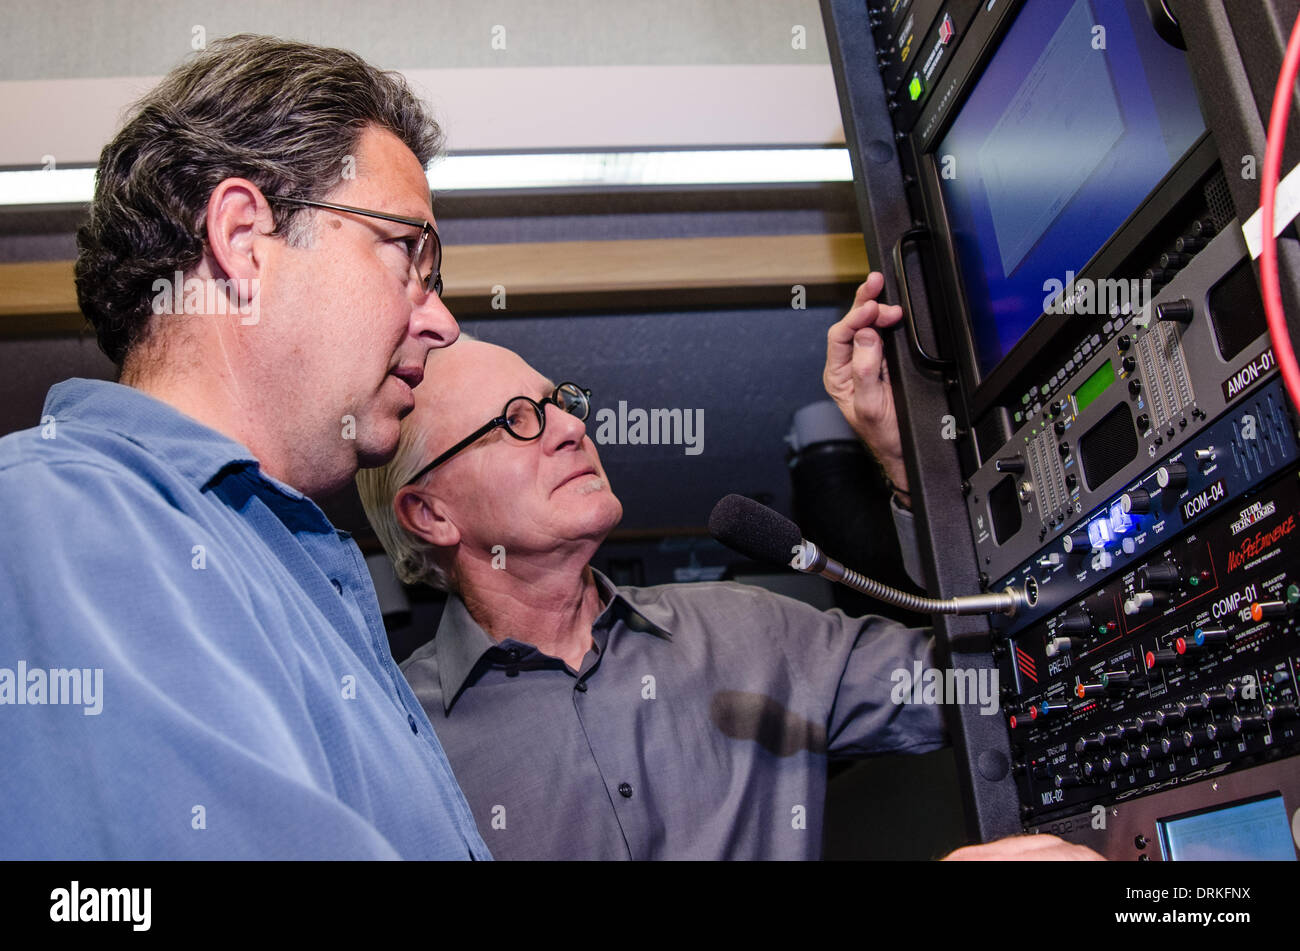 Working on the company's new audio system Dolby Atmos, engineers Kevin Perry (left) and Thomas Bruchs check the settings of a sound mixing panel. The engineers work at company headquarters in San Francisco, testing equpment in an ultra-modern screening ro Stock Photo